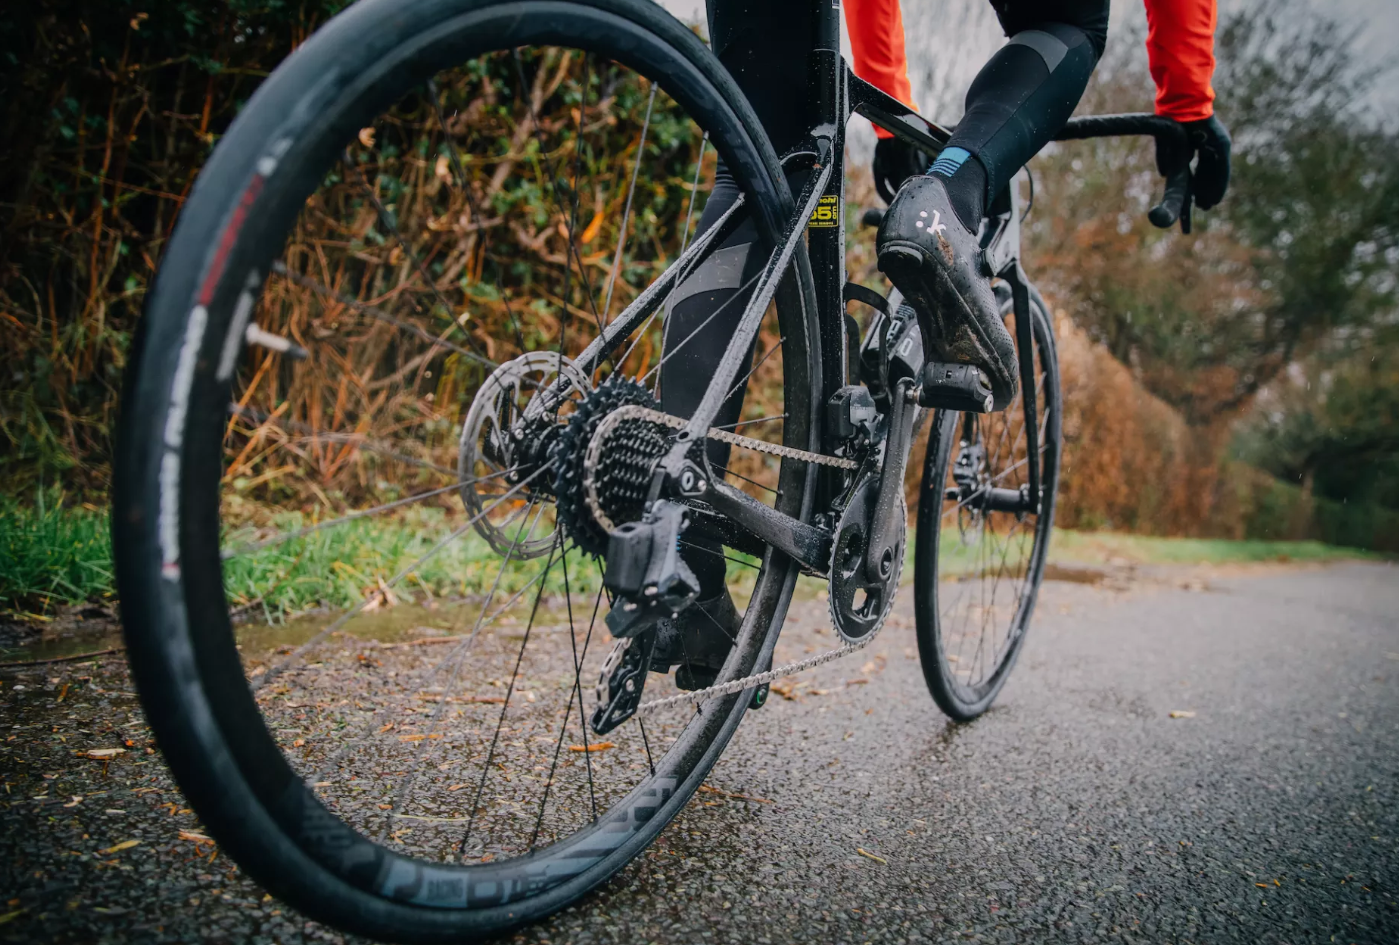 If a mountain bike chain is too short, it will not allow you to shift through your gears smoothly.